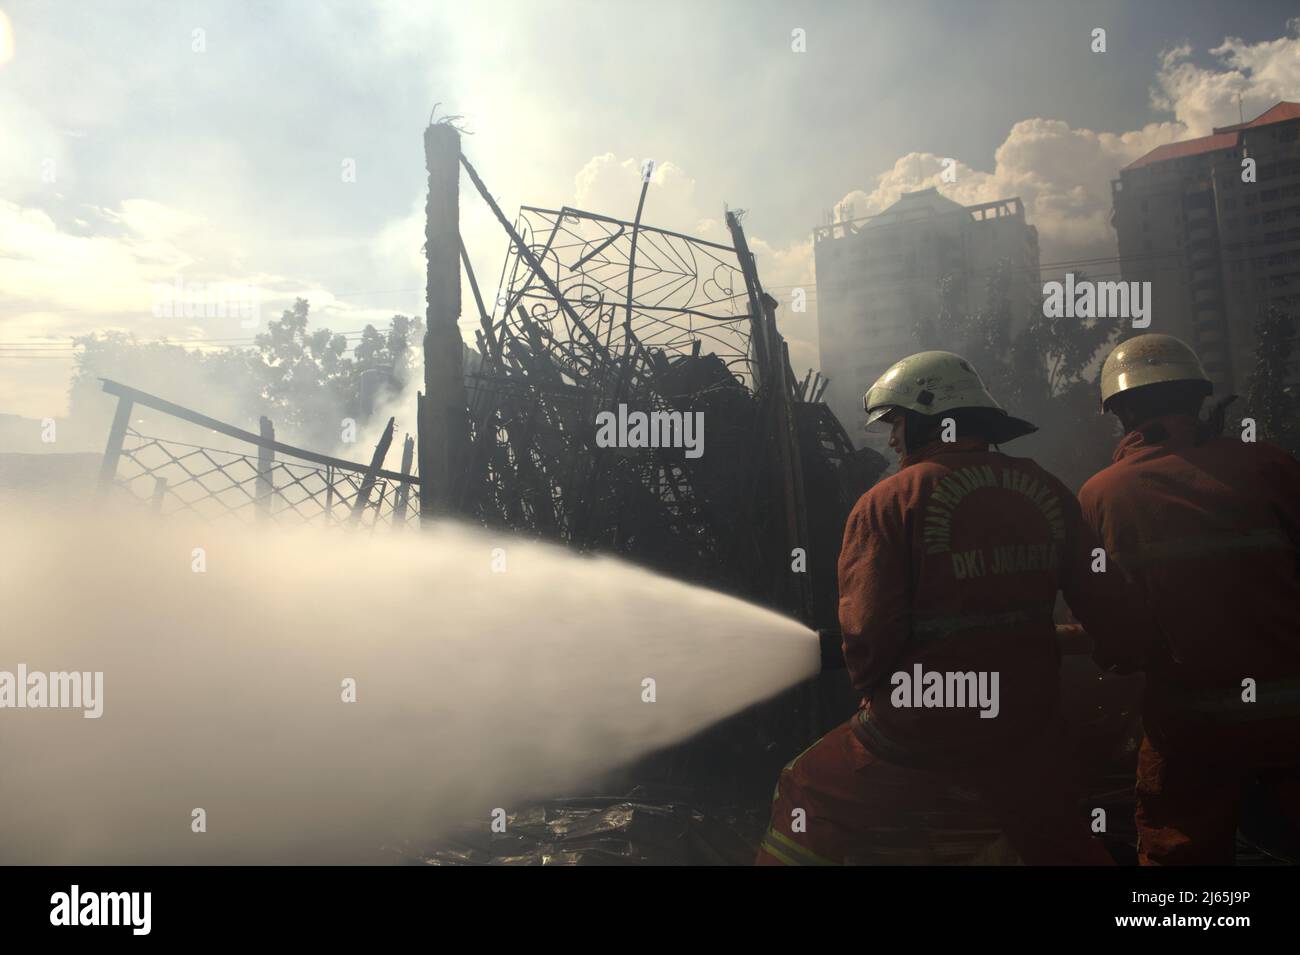 Members of Jakarta firefighting squad performing the cooling phase after a fire accident burned down storage buildings of a home industry in Kebayoran Lama, South Jakarta, Jakarta, Indonesia. Stock Photo